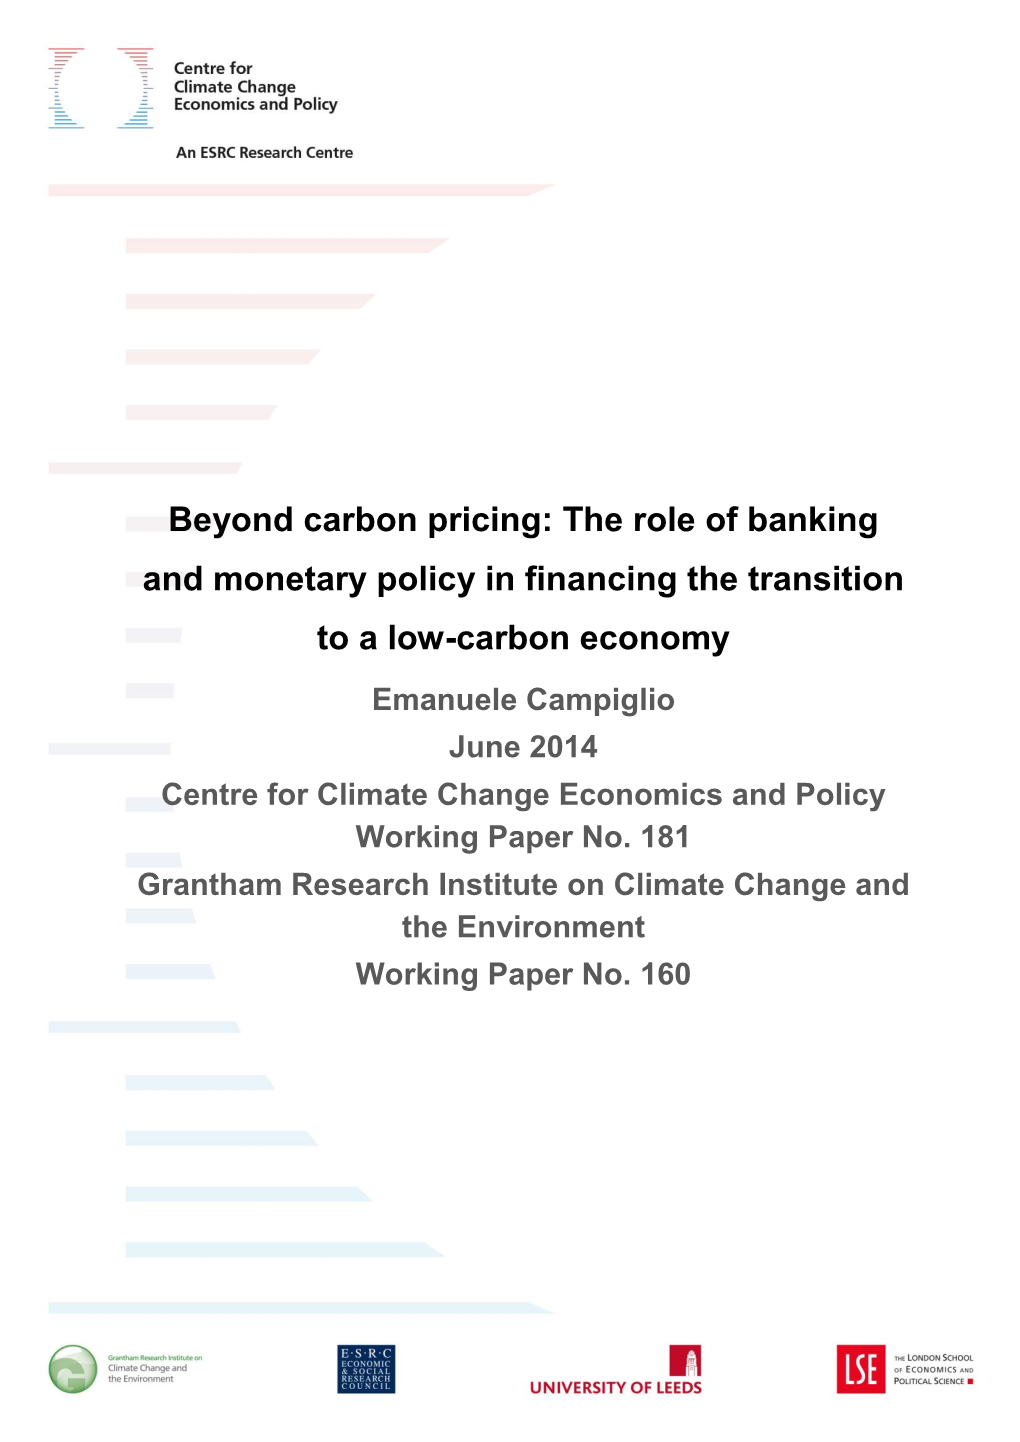 Beyond Carbon Pricing: the Role of Banking and Monetary Policy In